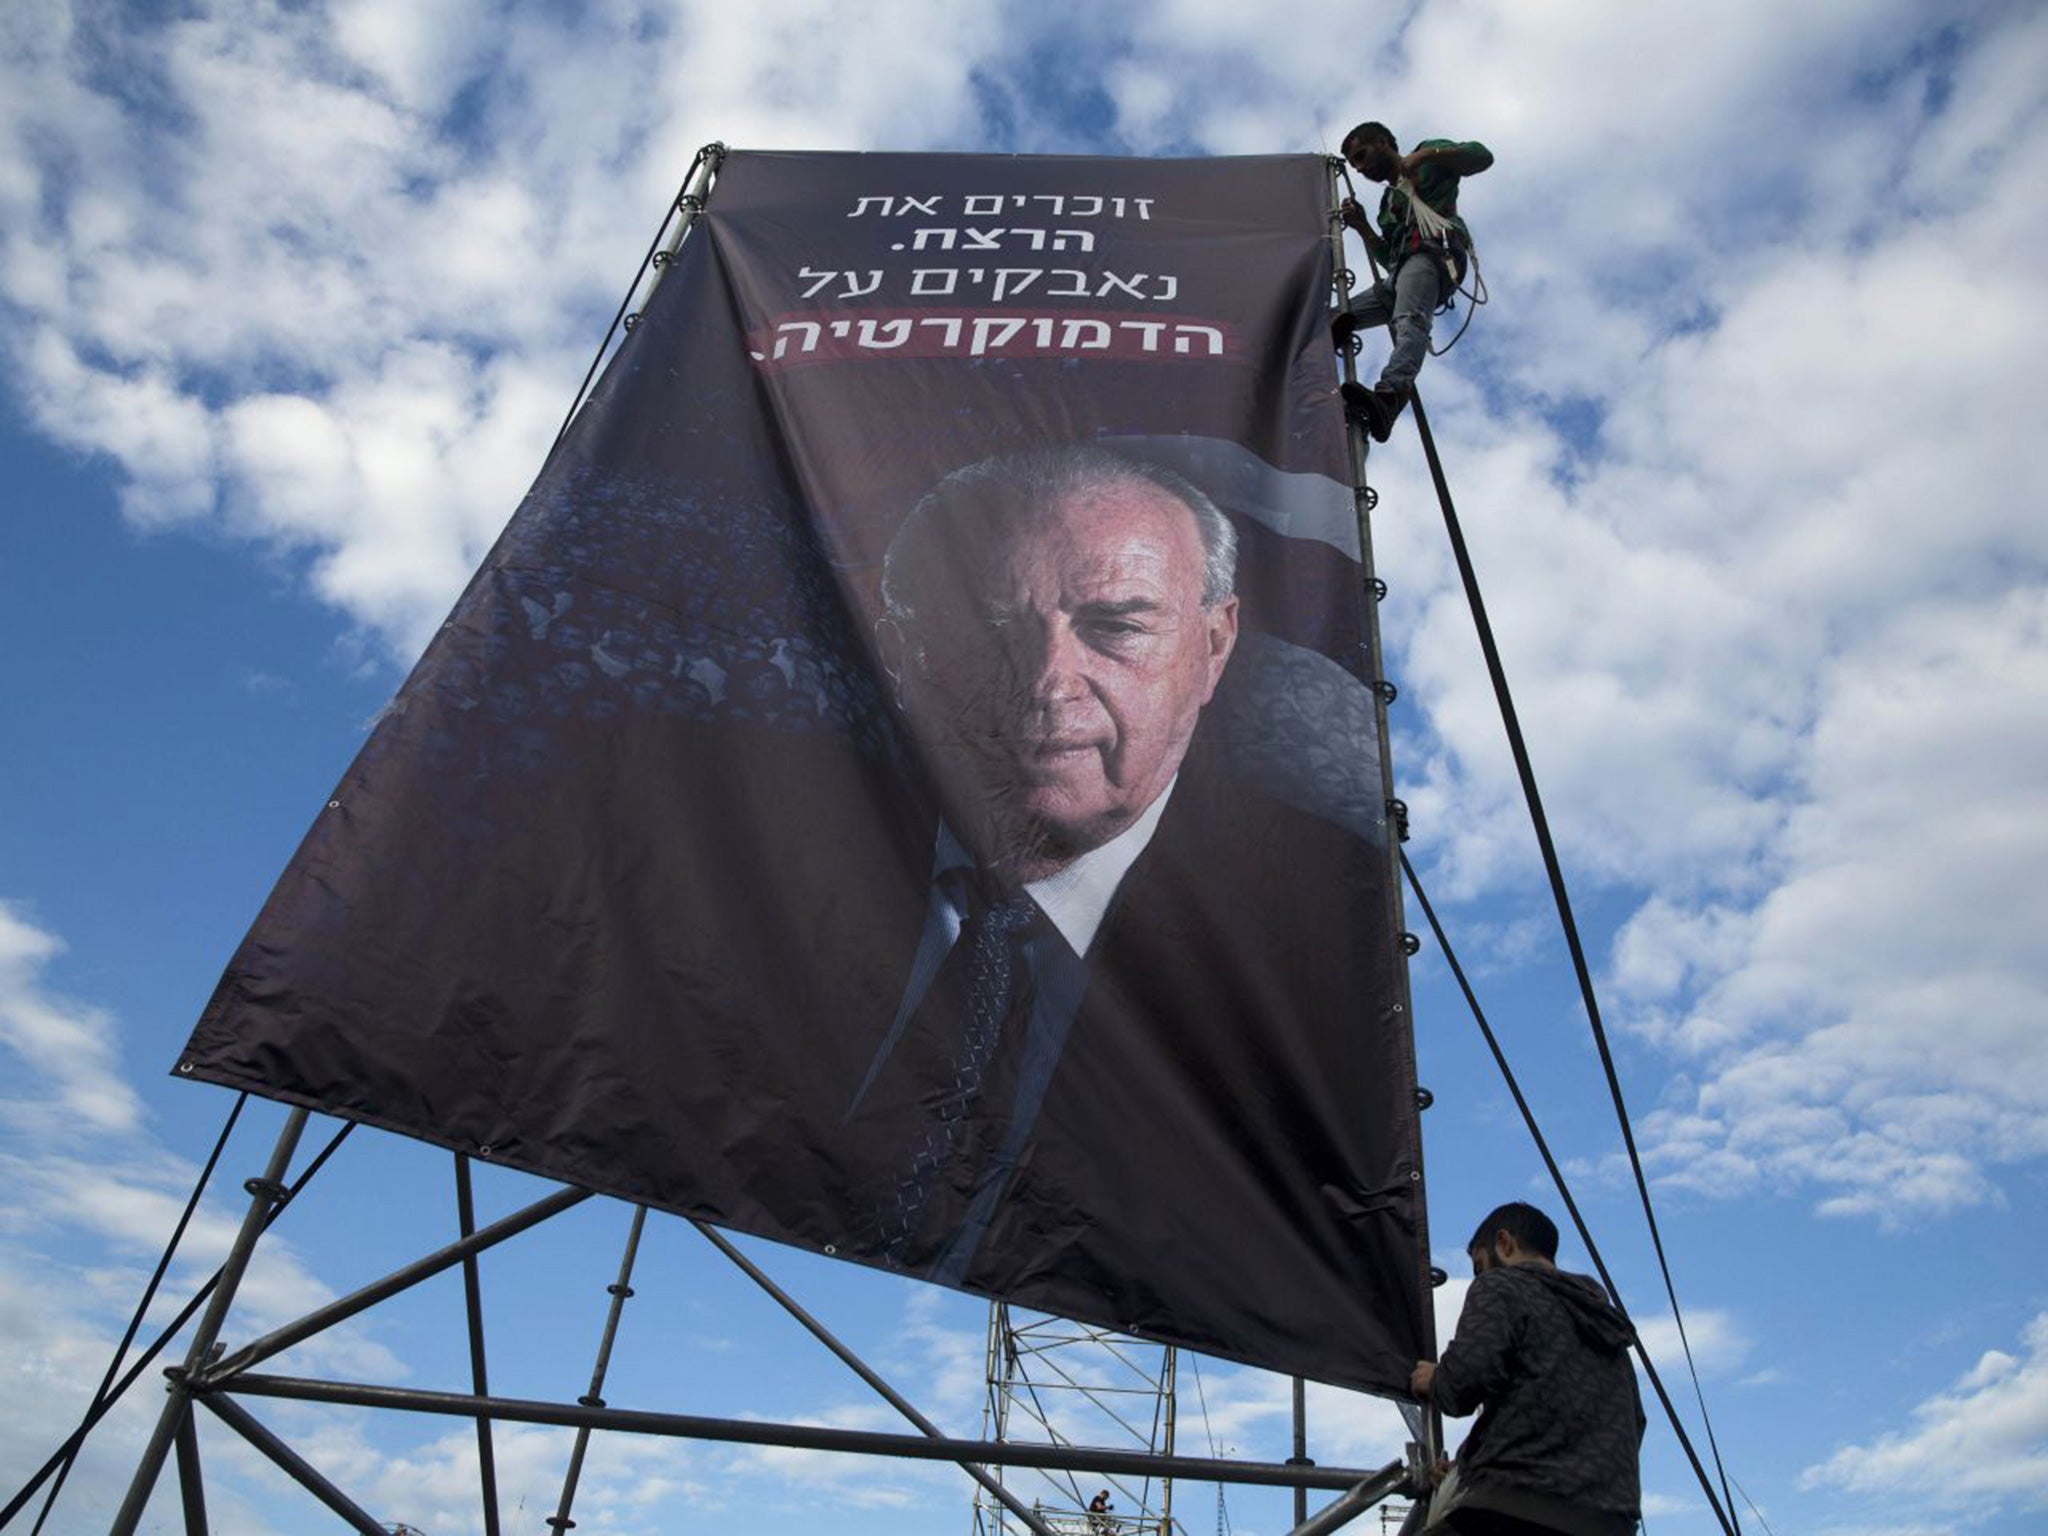 Preparations for a memorial rally in Tel Aviv on the 20th anniversary of Yitzhak Rabin’s assassination